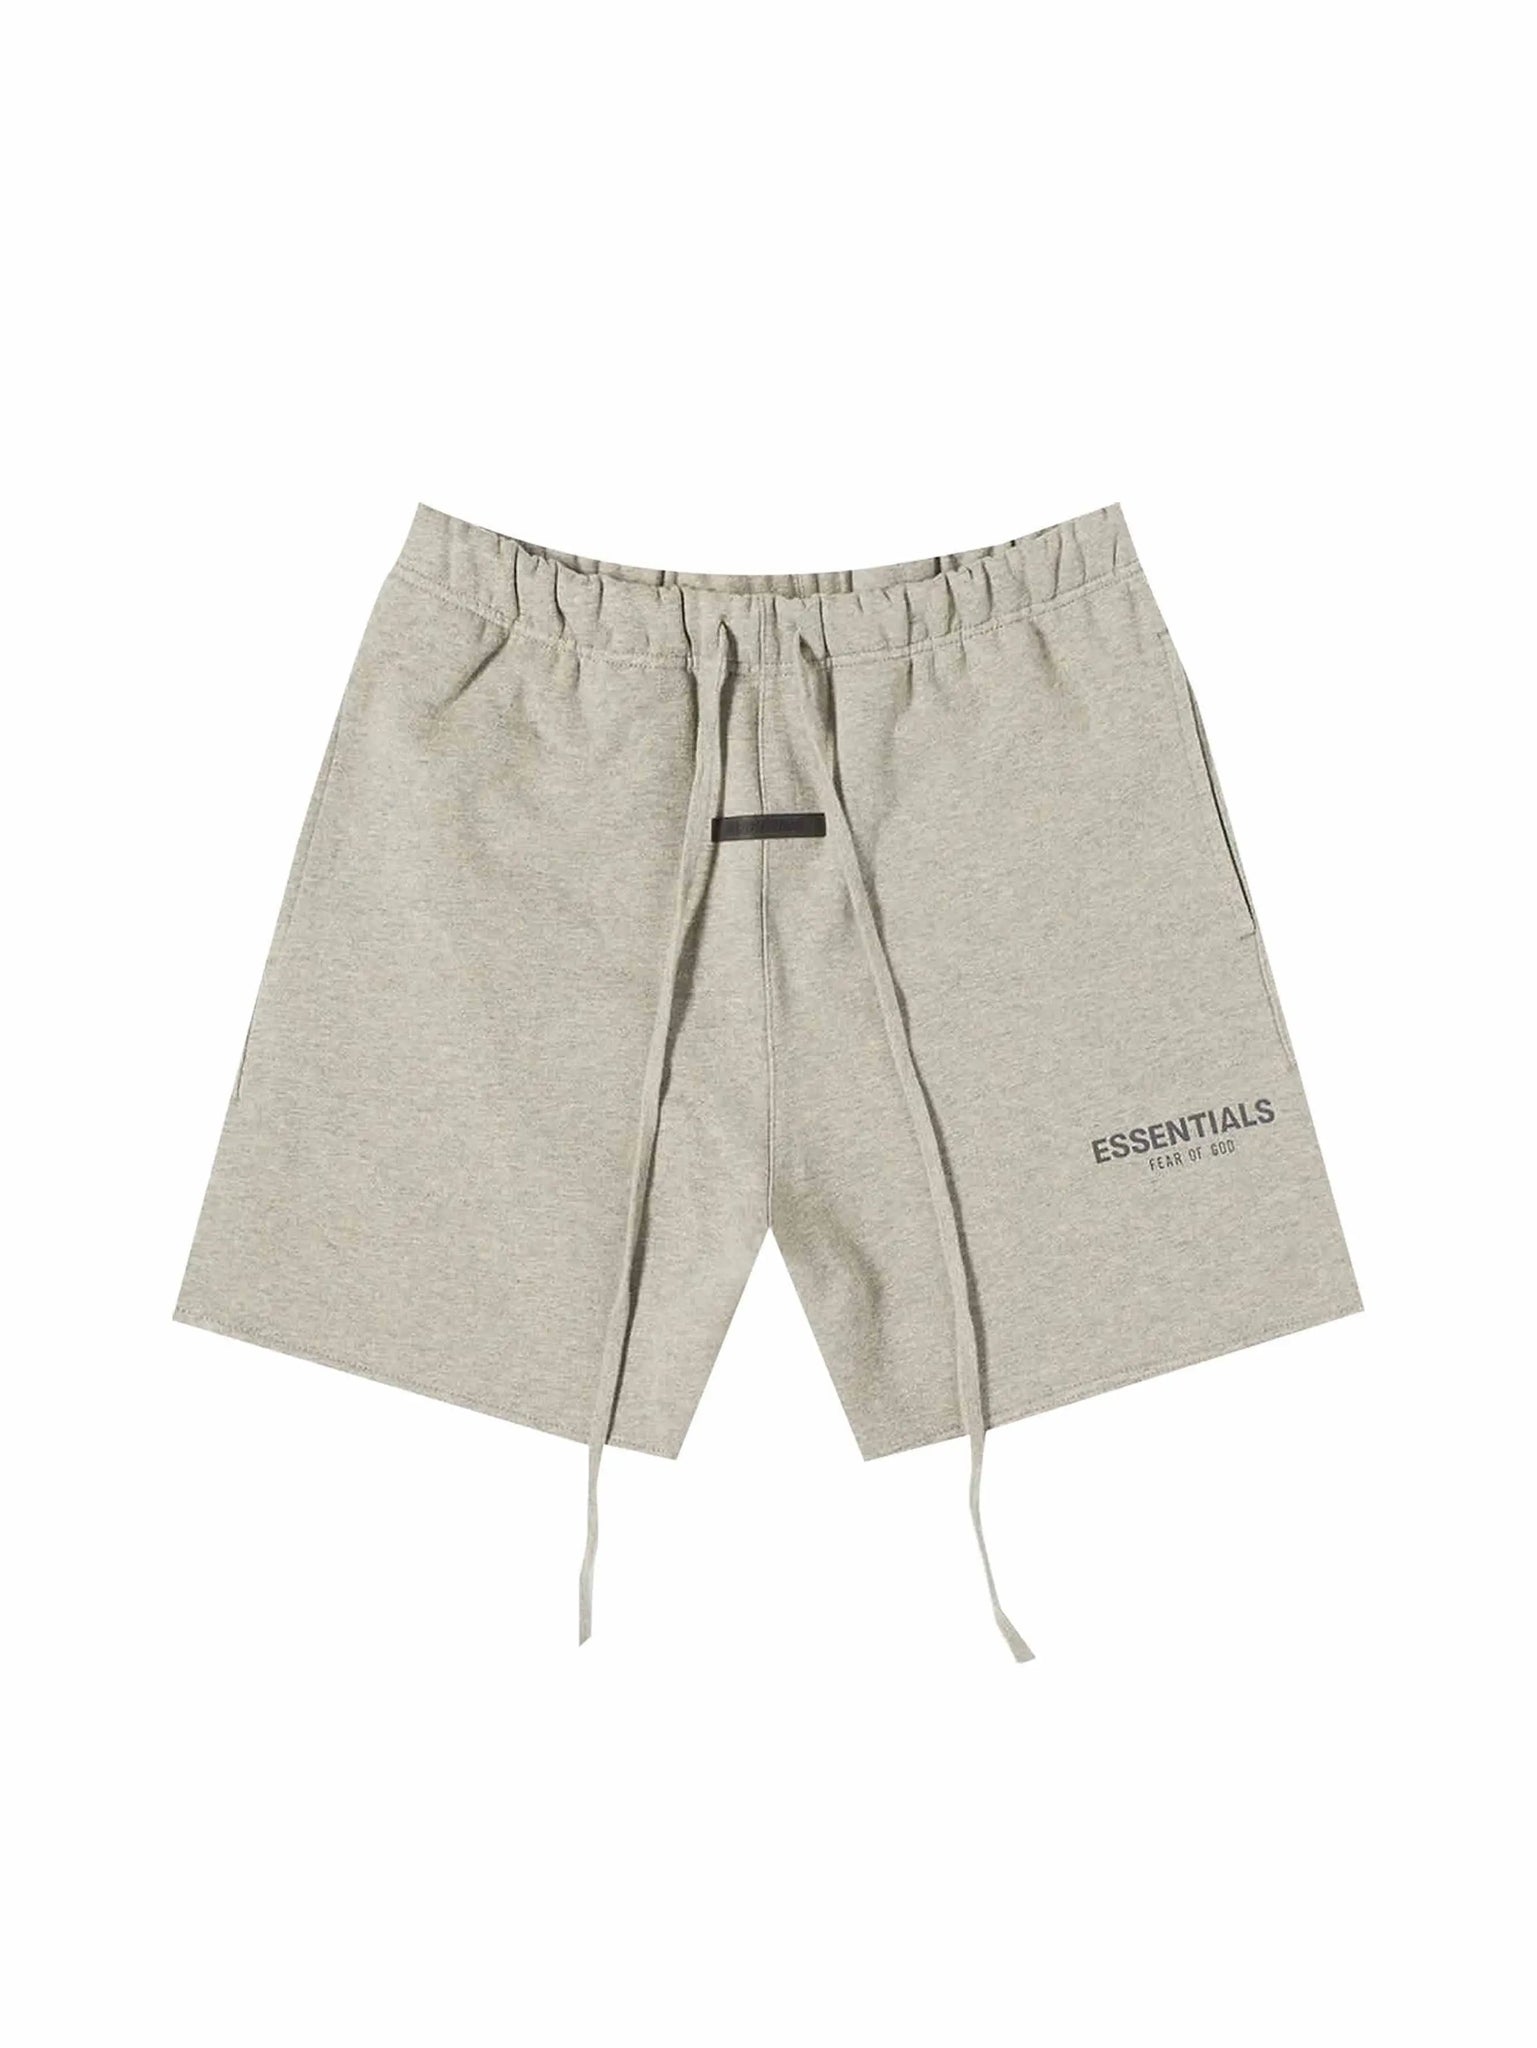 Fear Of God Essentials Dark Heather Oatmeal Shorts (SS21) in Auckland, New Zealand - Shop name